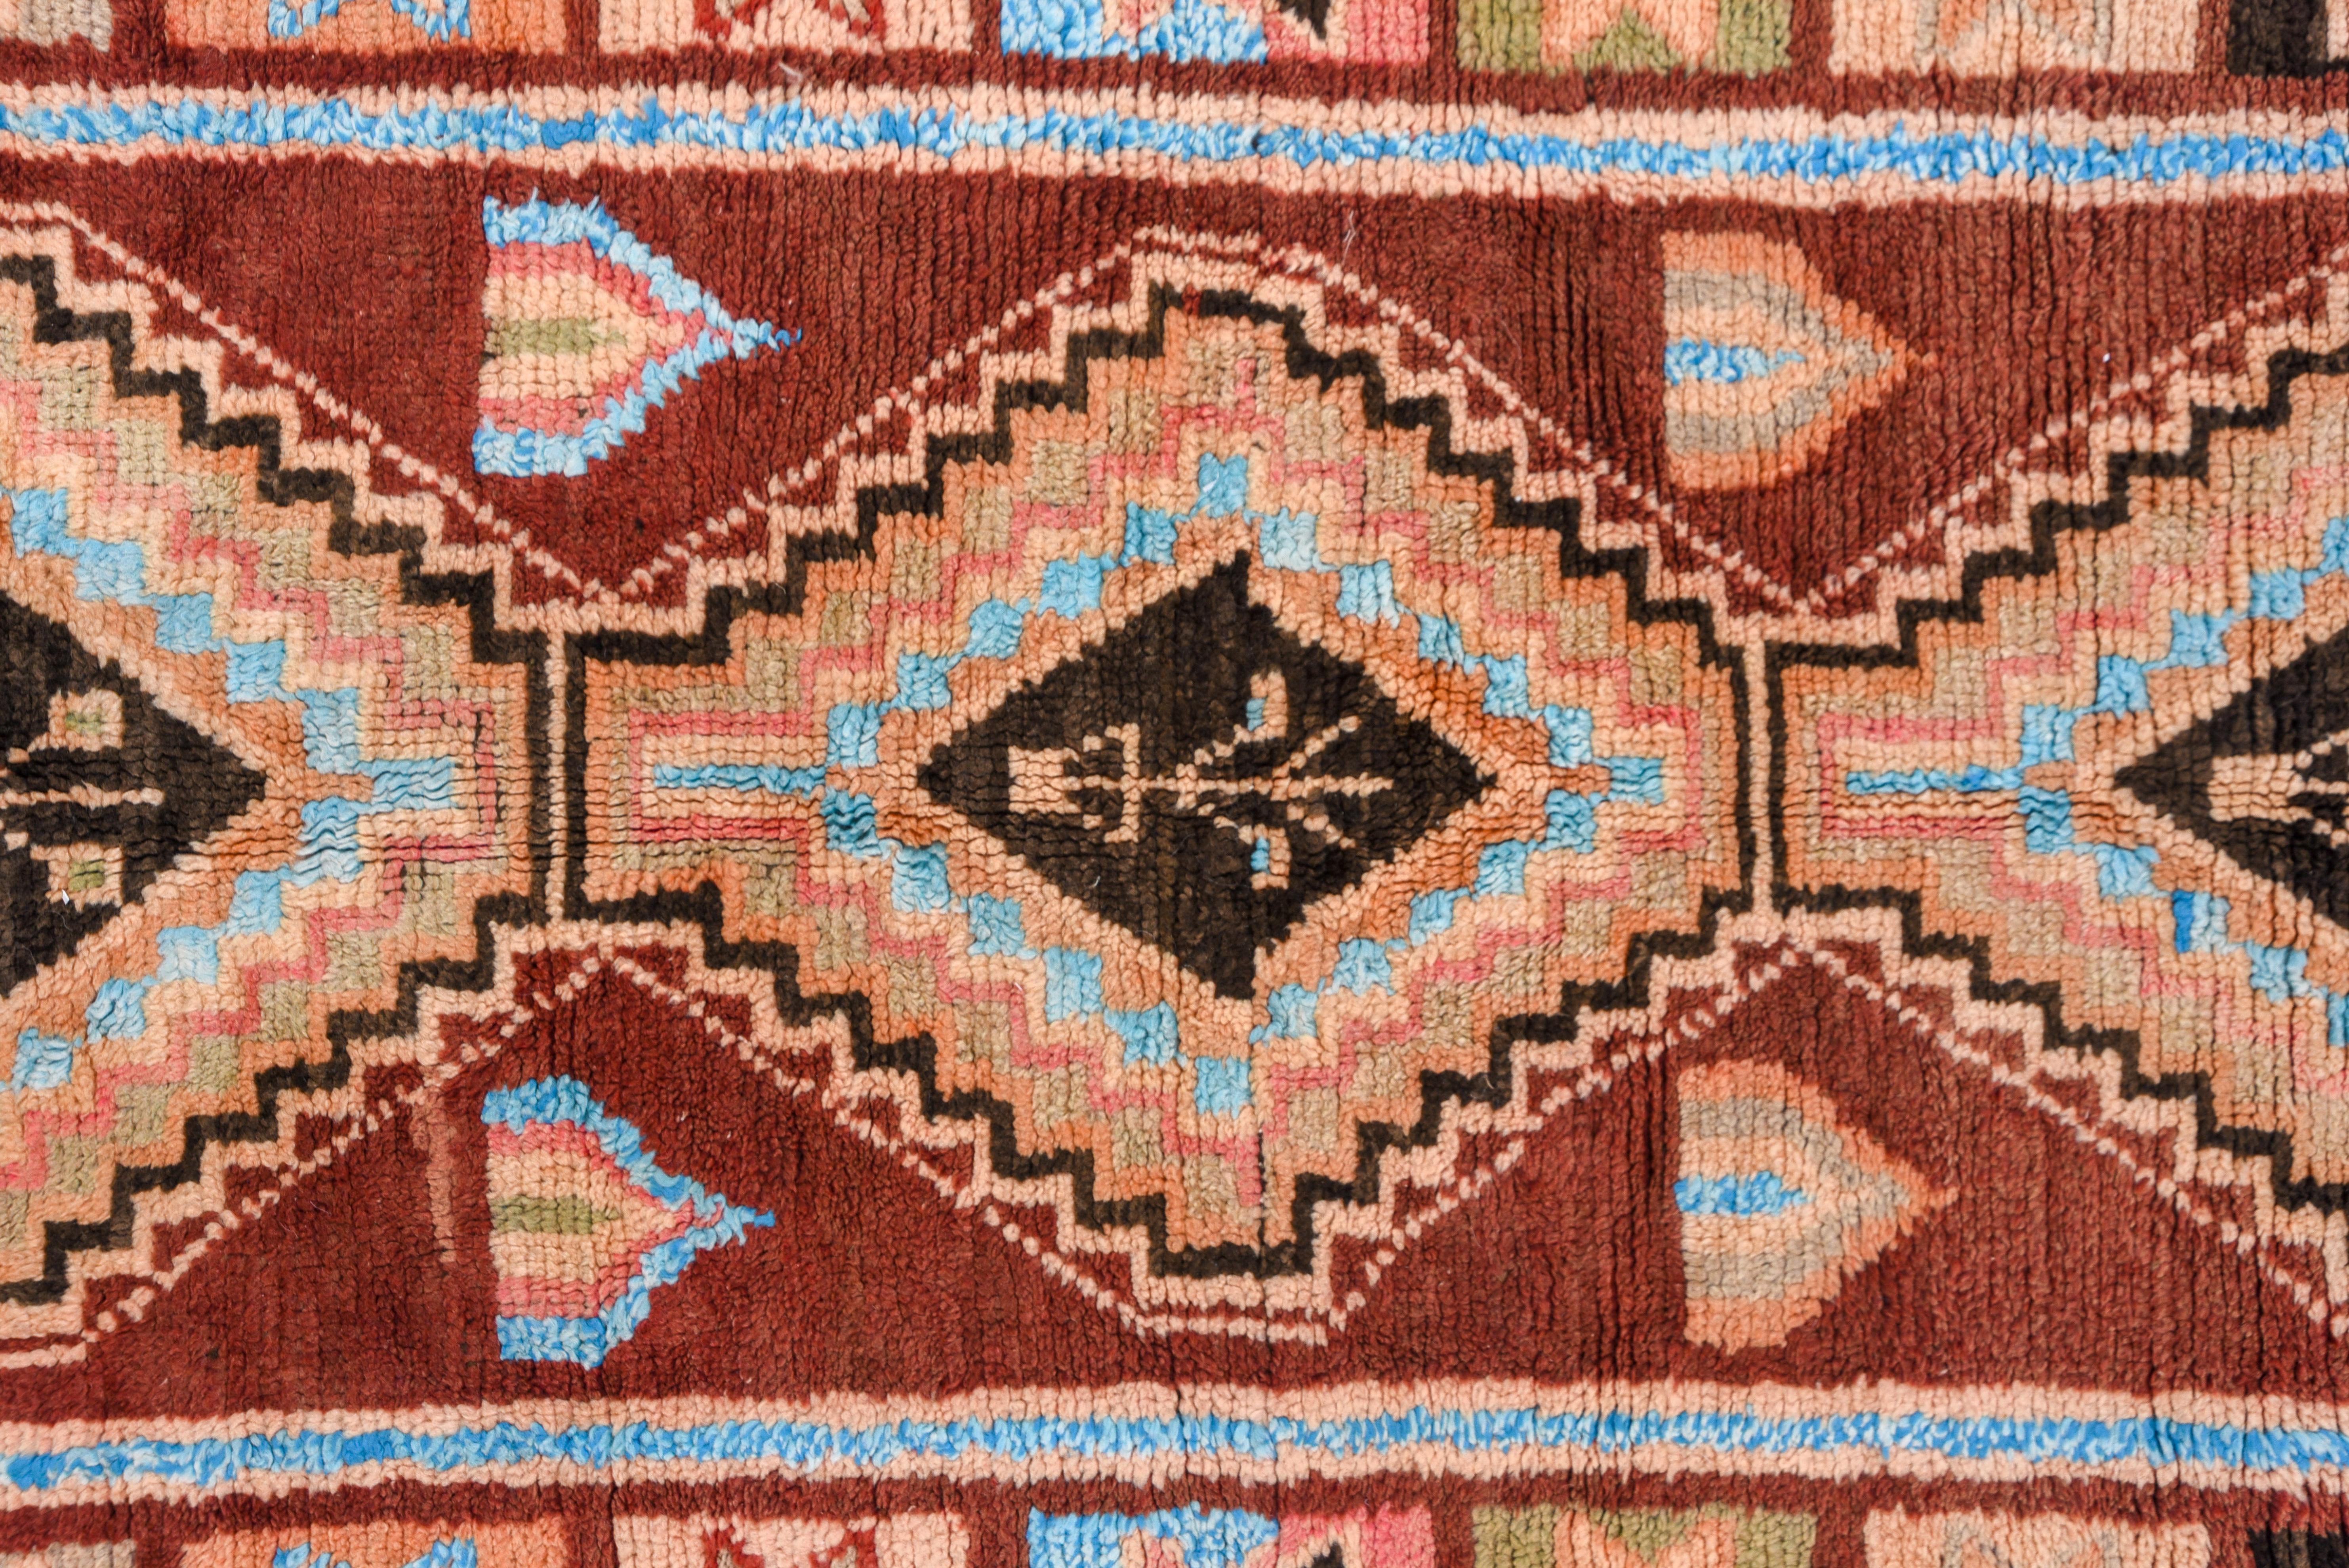 With Caucasian influence, the sienna field features a pole of three tall, stepped octagons and straw tabbed boxes. The border of stars-in-squares has a Turkish flavor. Colorful and makes a statement.